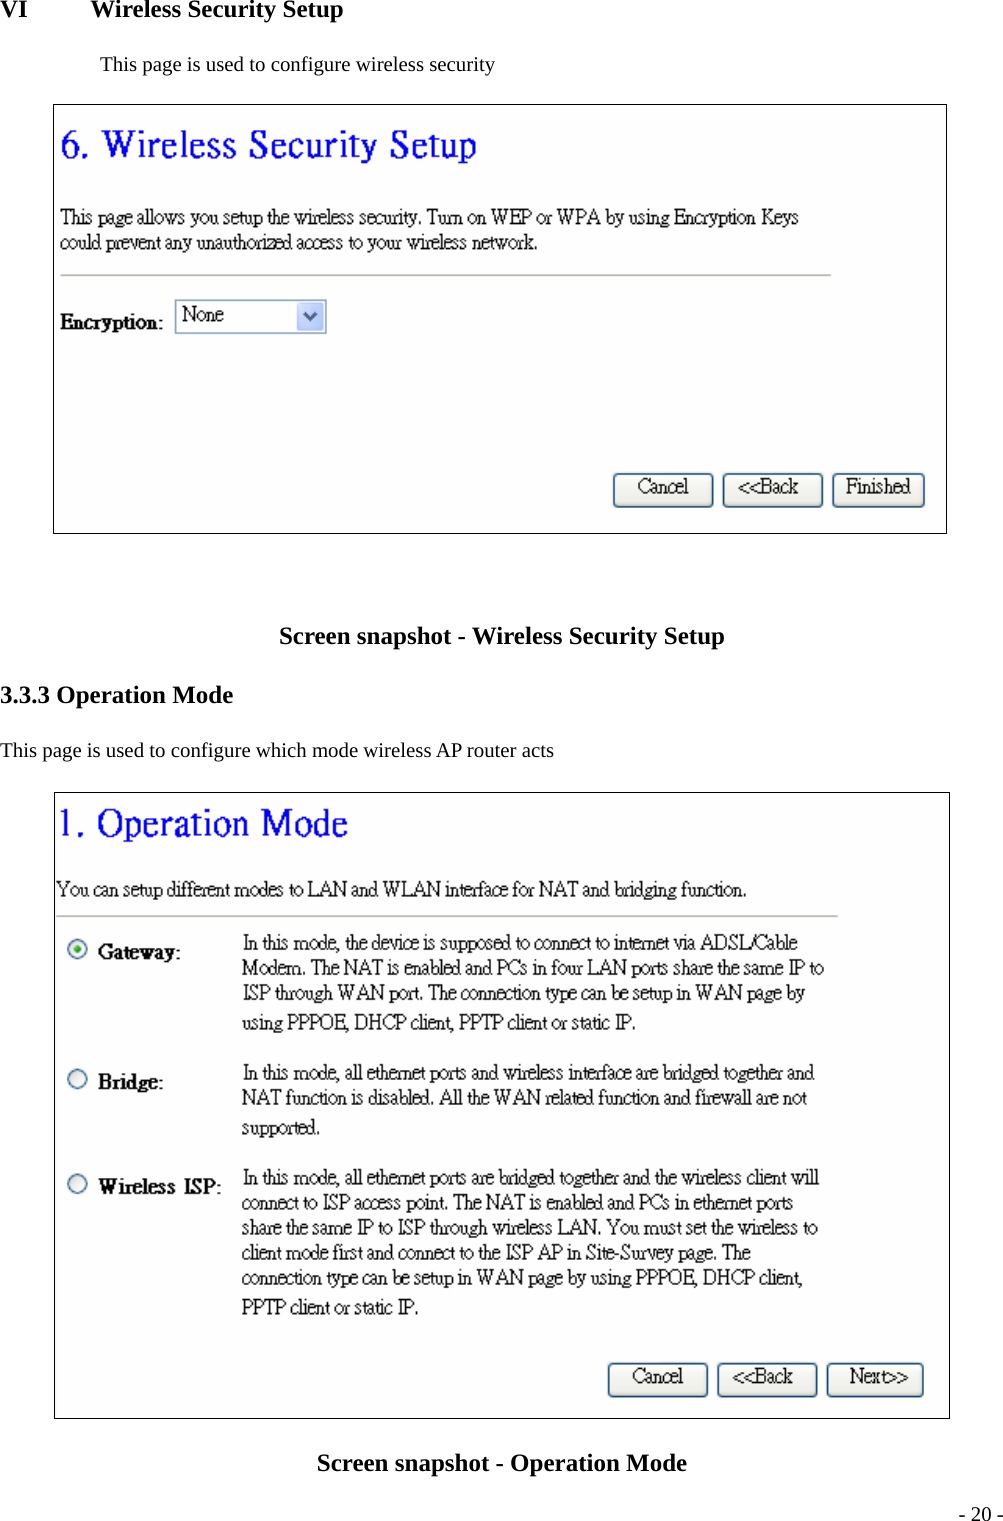 VI     Wireless Security Setup This page is used to configure wireless security  Screen snapshot - Wireless Security Setup 3.3.3 Operation Mode This page is used to configure which mode wireless AP router acts  Screen snapshot - Operation Mode  - 20 -